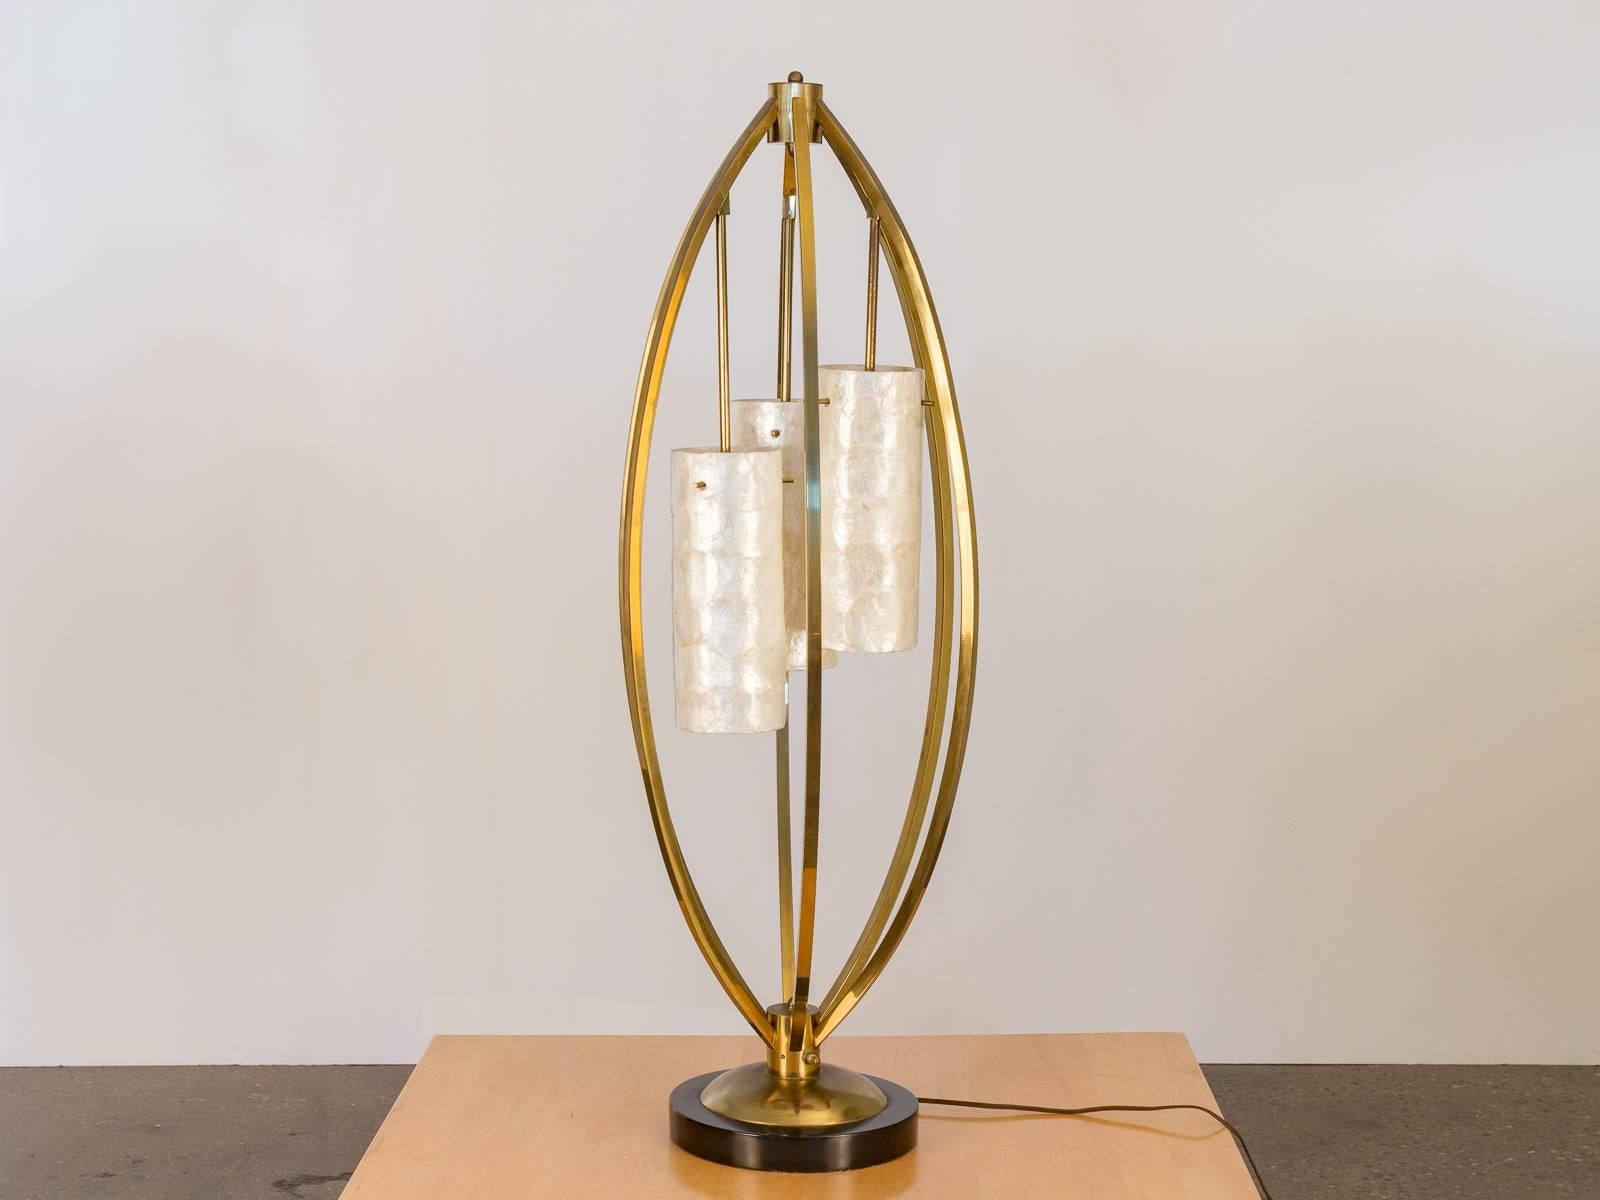 Great-looking brass and capiz shell three-shade lamp. Impressive form and construction make this a perfect accent piece for any interior.

